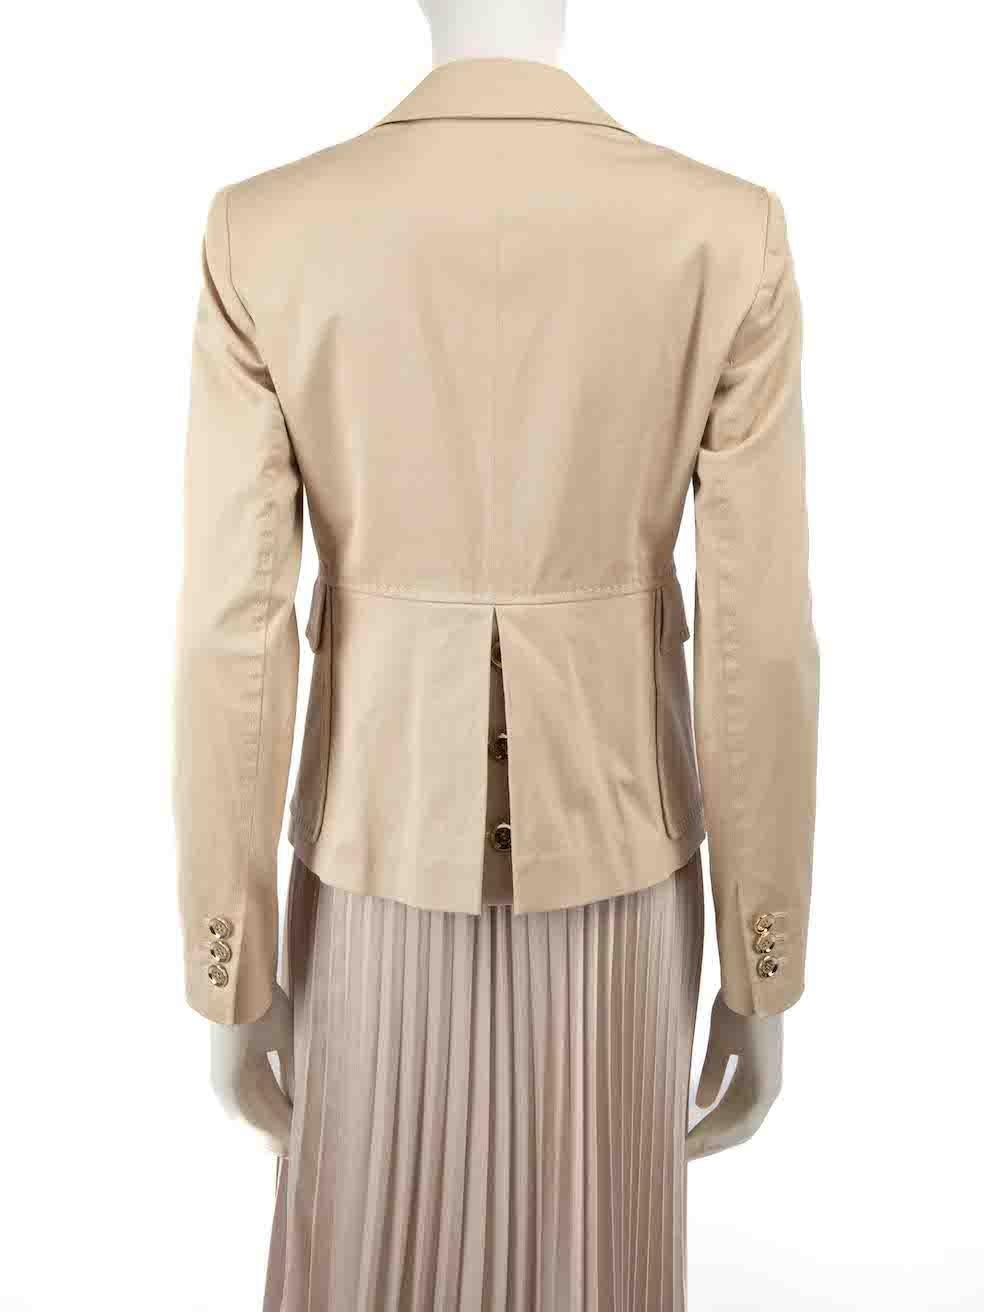 Gucci Beige Single Breasted Blazer Size M In Good Condition For Sale In London, GB